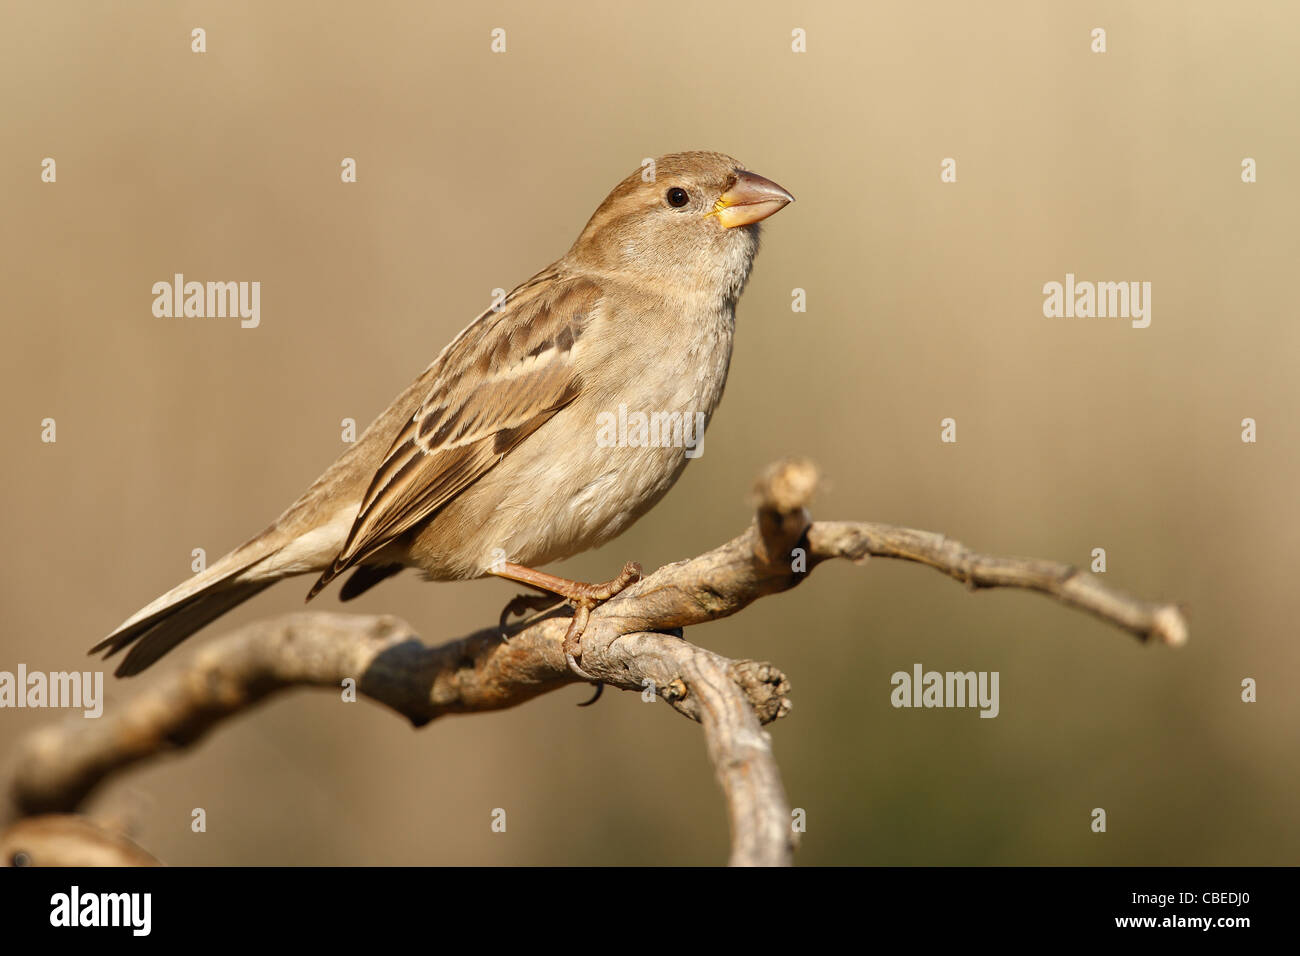 Spanish Sparrow (Passer hispaniolensis), female perched on a twig. Stock Photo